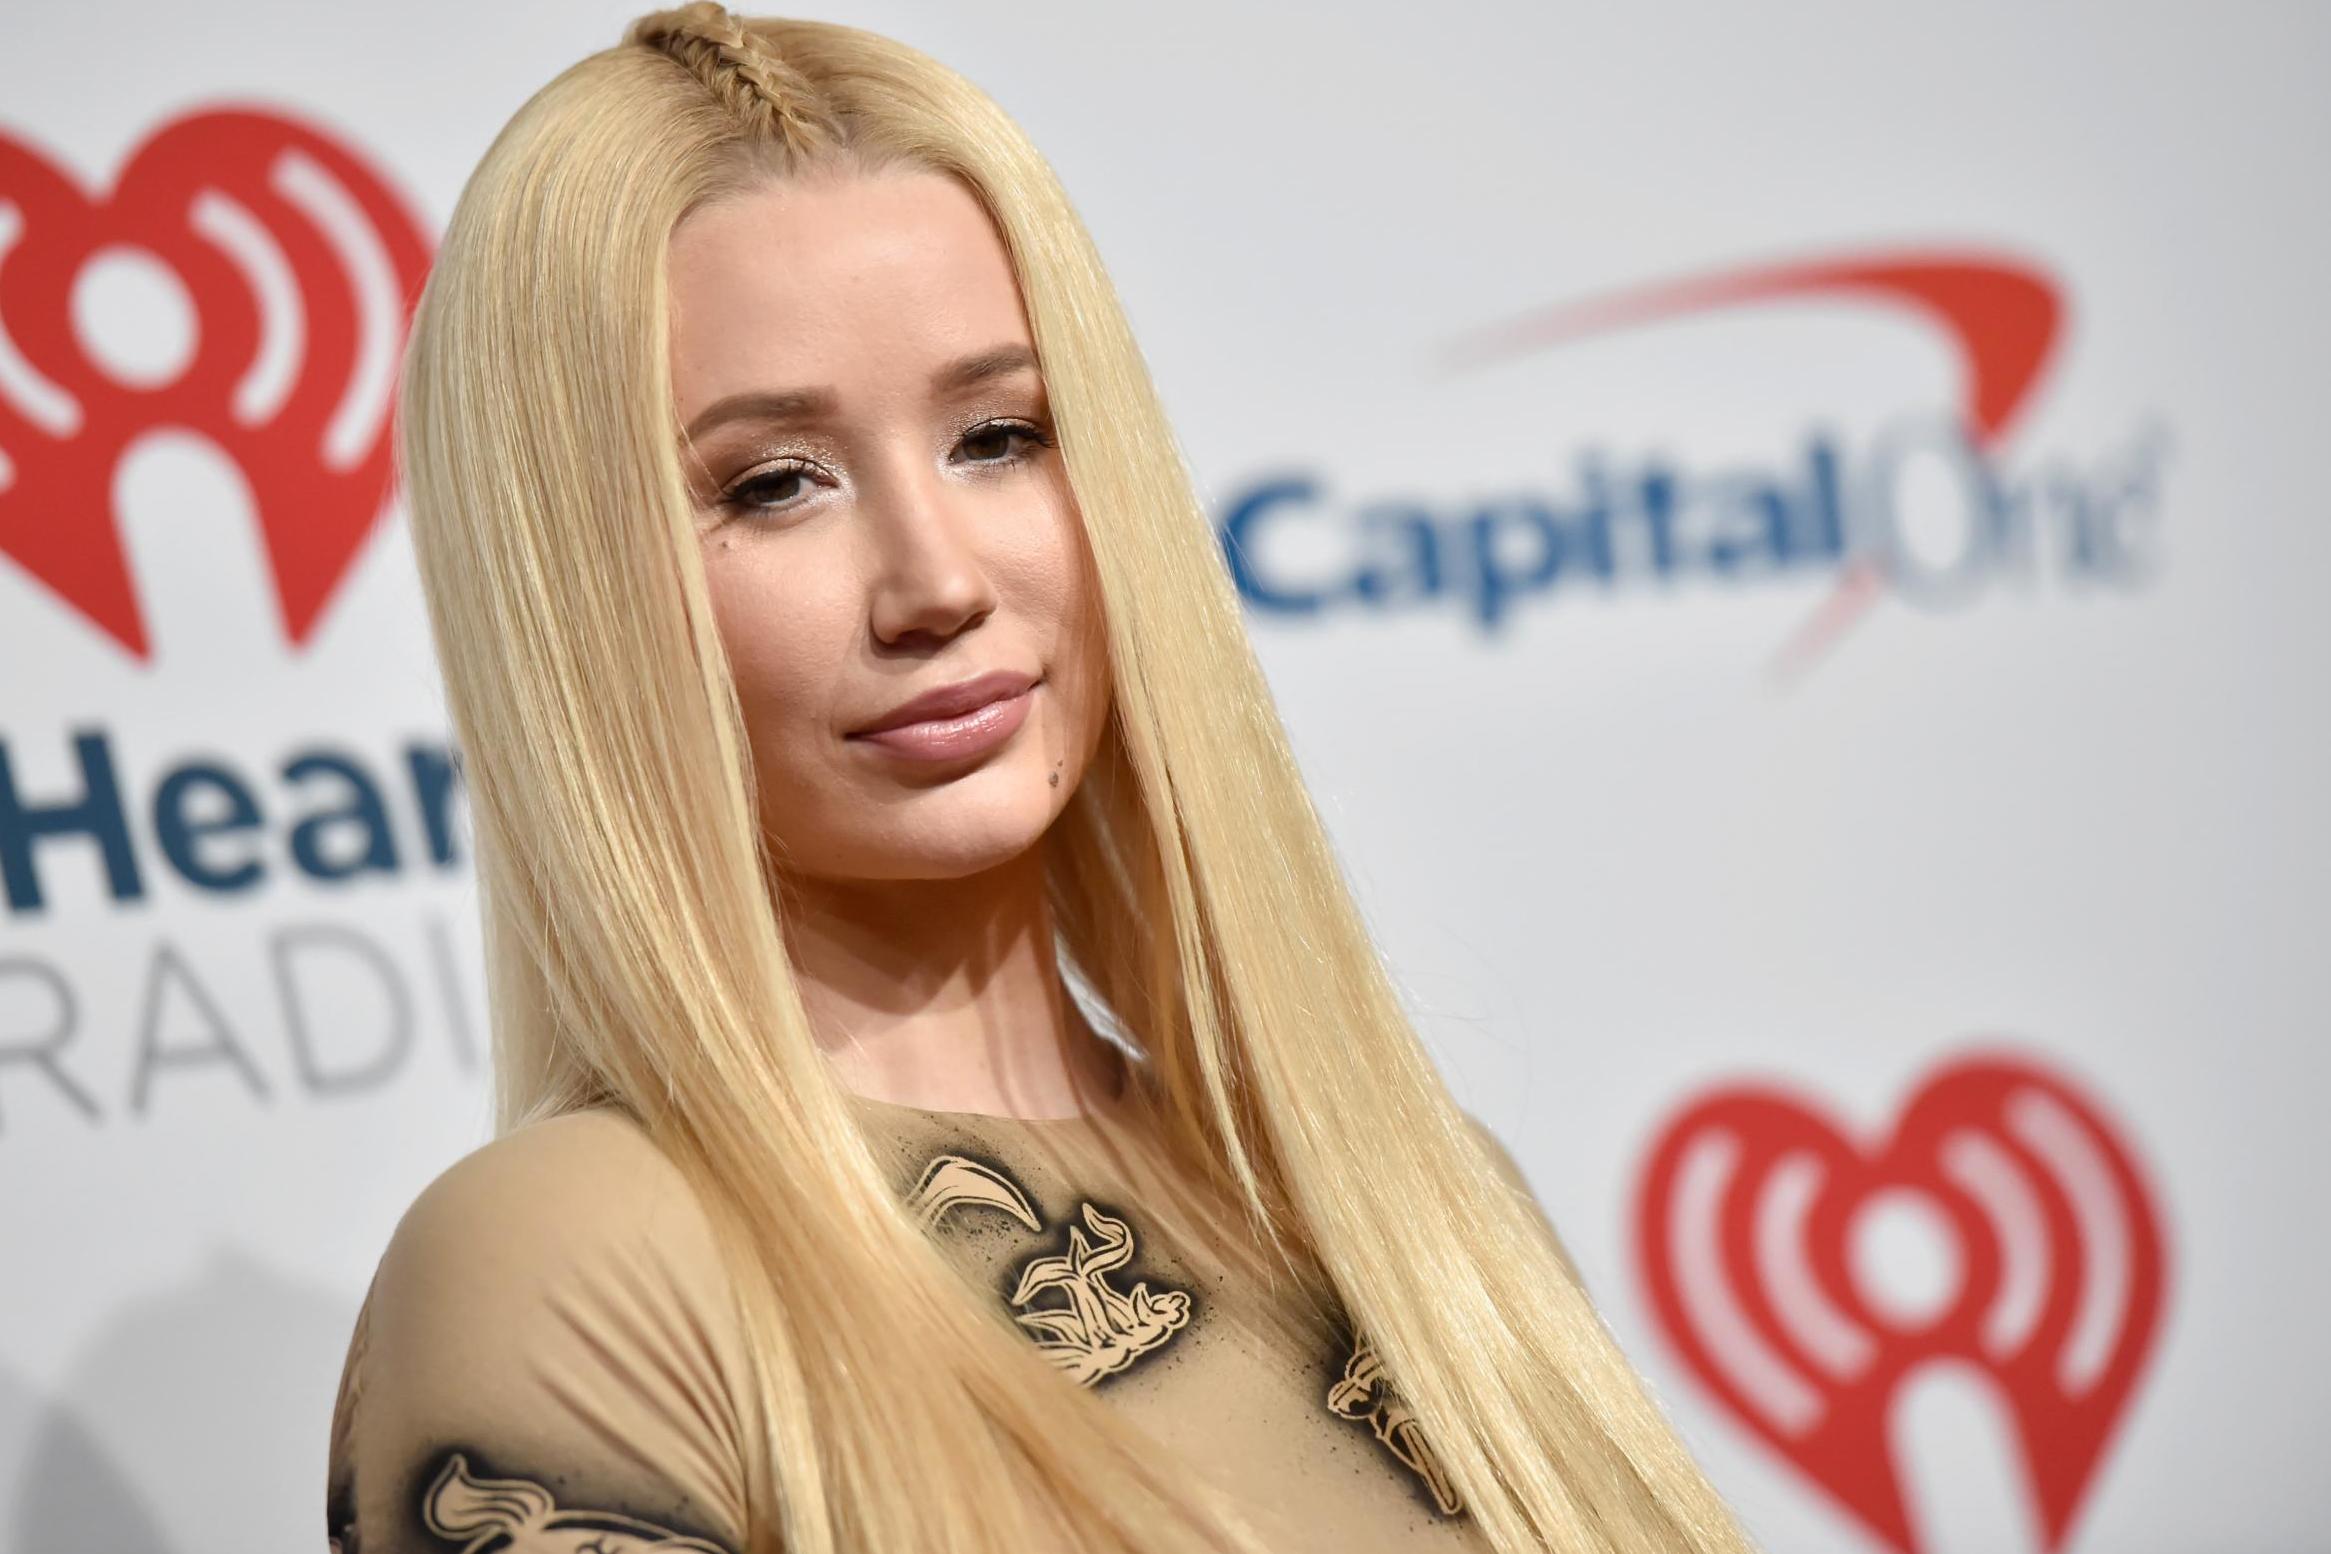 Iggy Azalea poses in the press room during the iHeartRadio Music Festival at T-Mobile Arena on 21 September, 2018 in Las Vegas, Nevada.